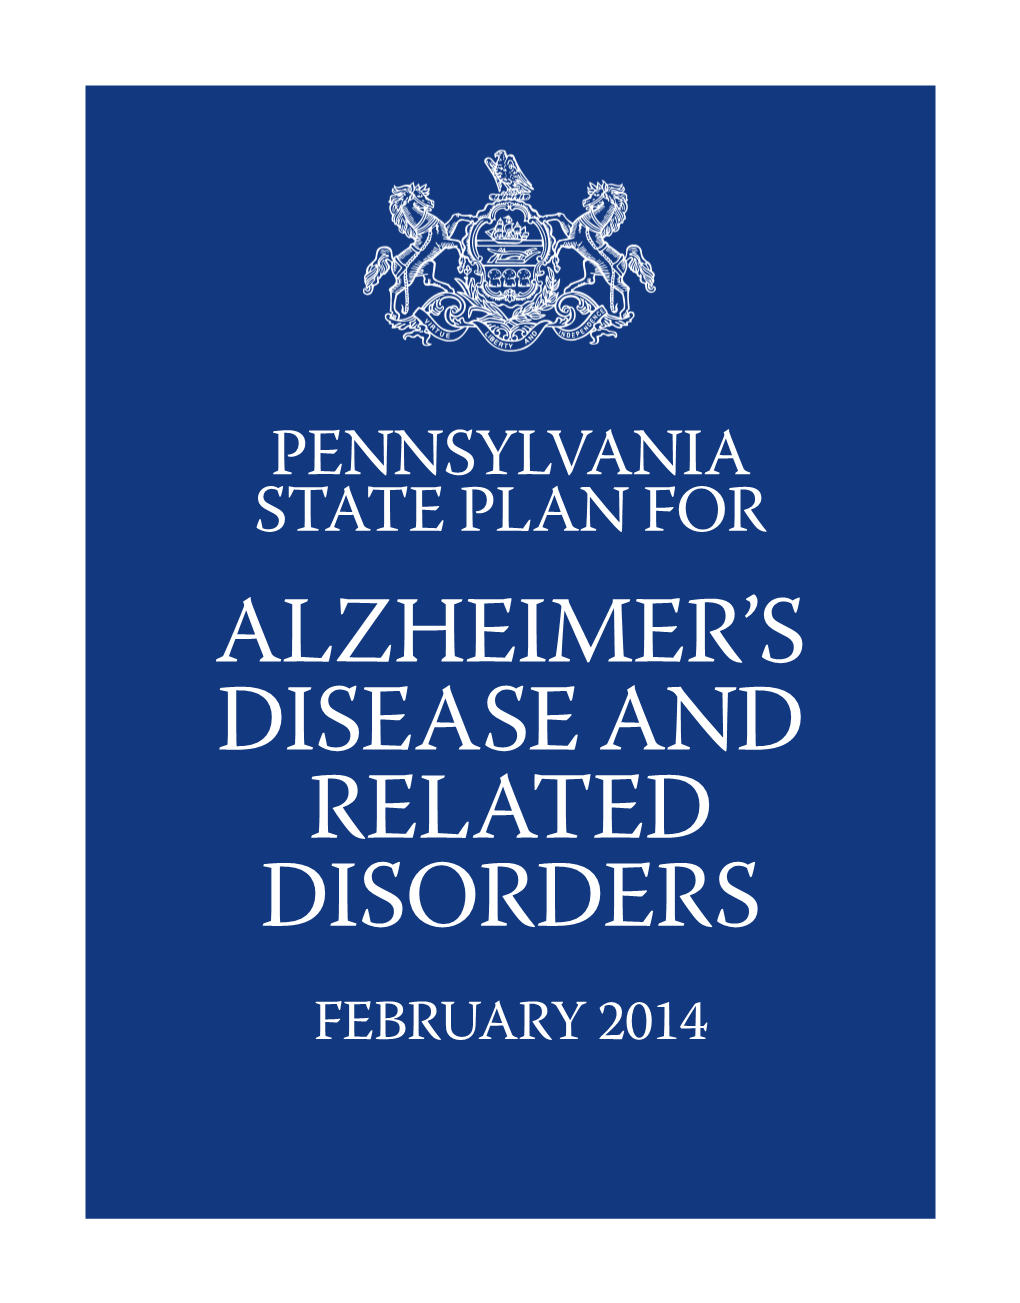 Pennsylvania State Plan on Alzheimer's Disease and Related